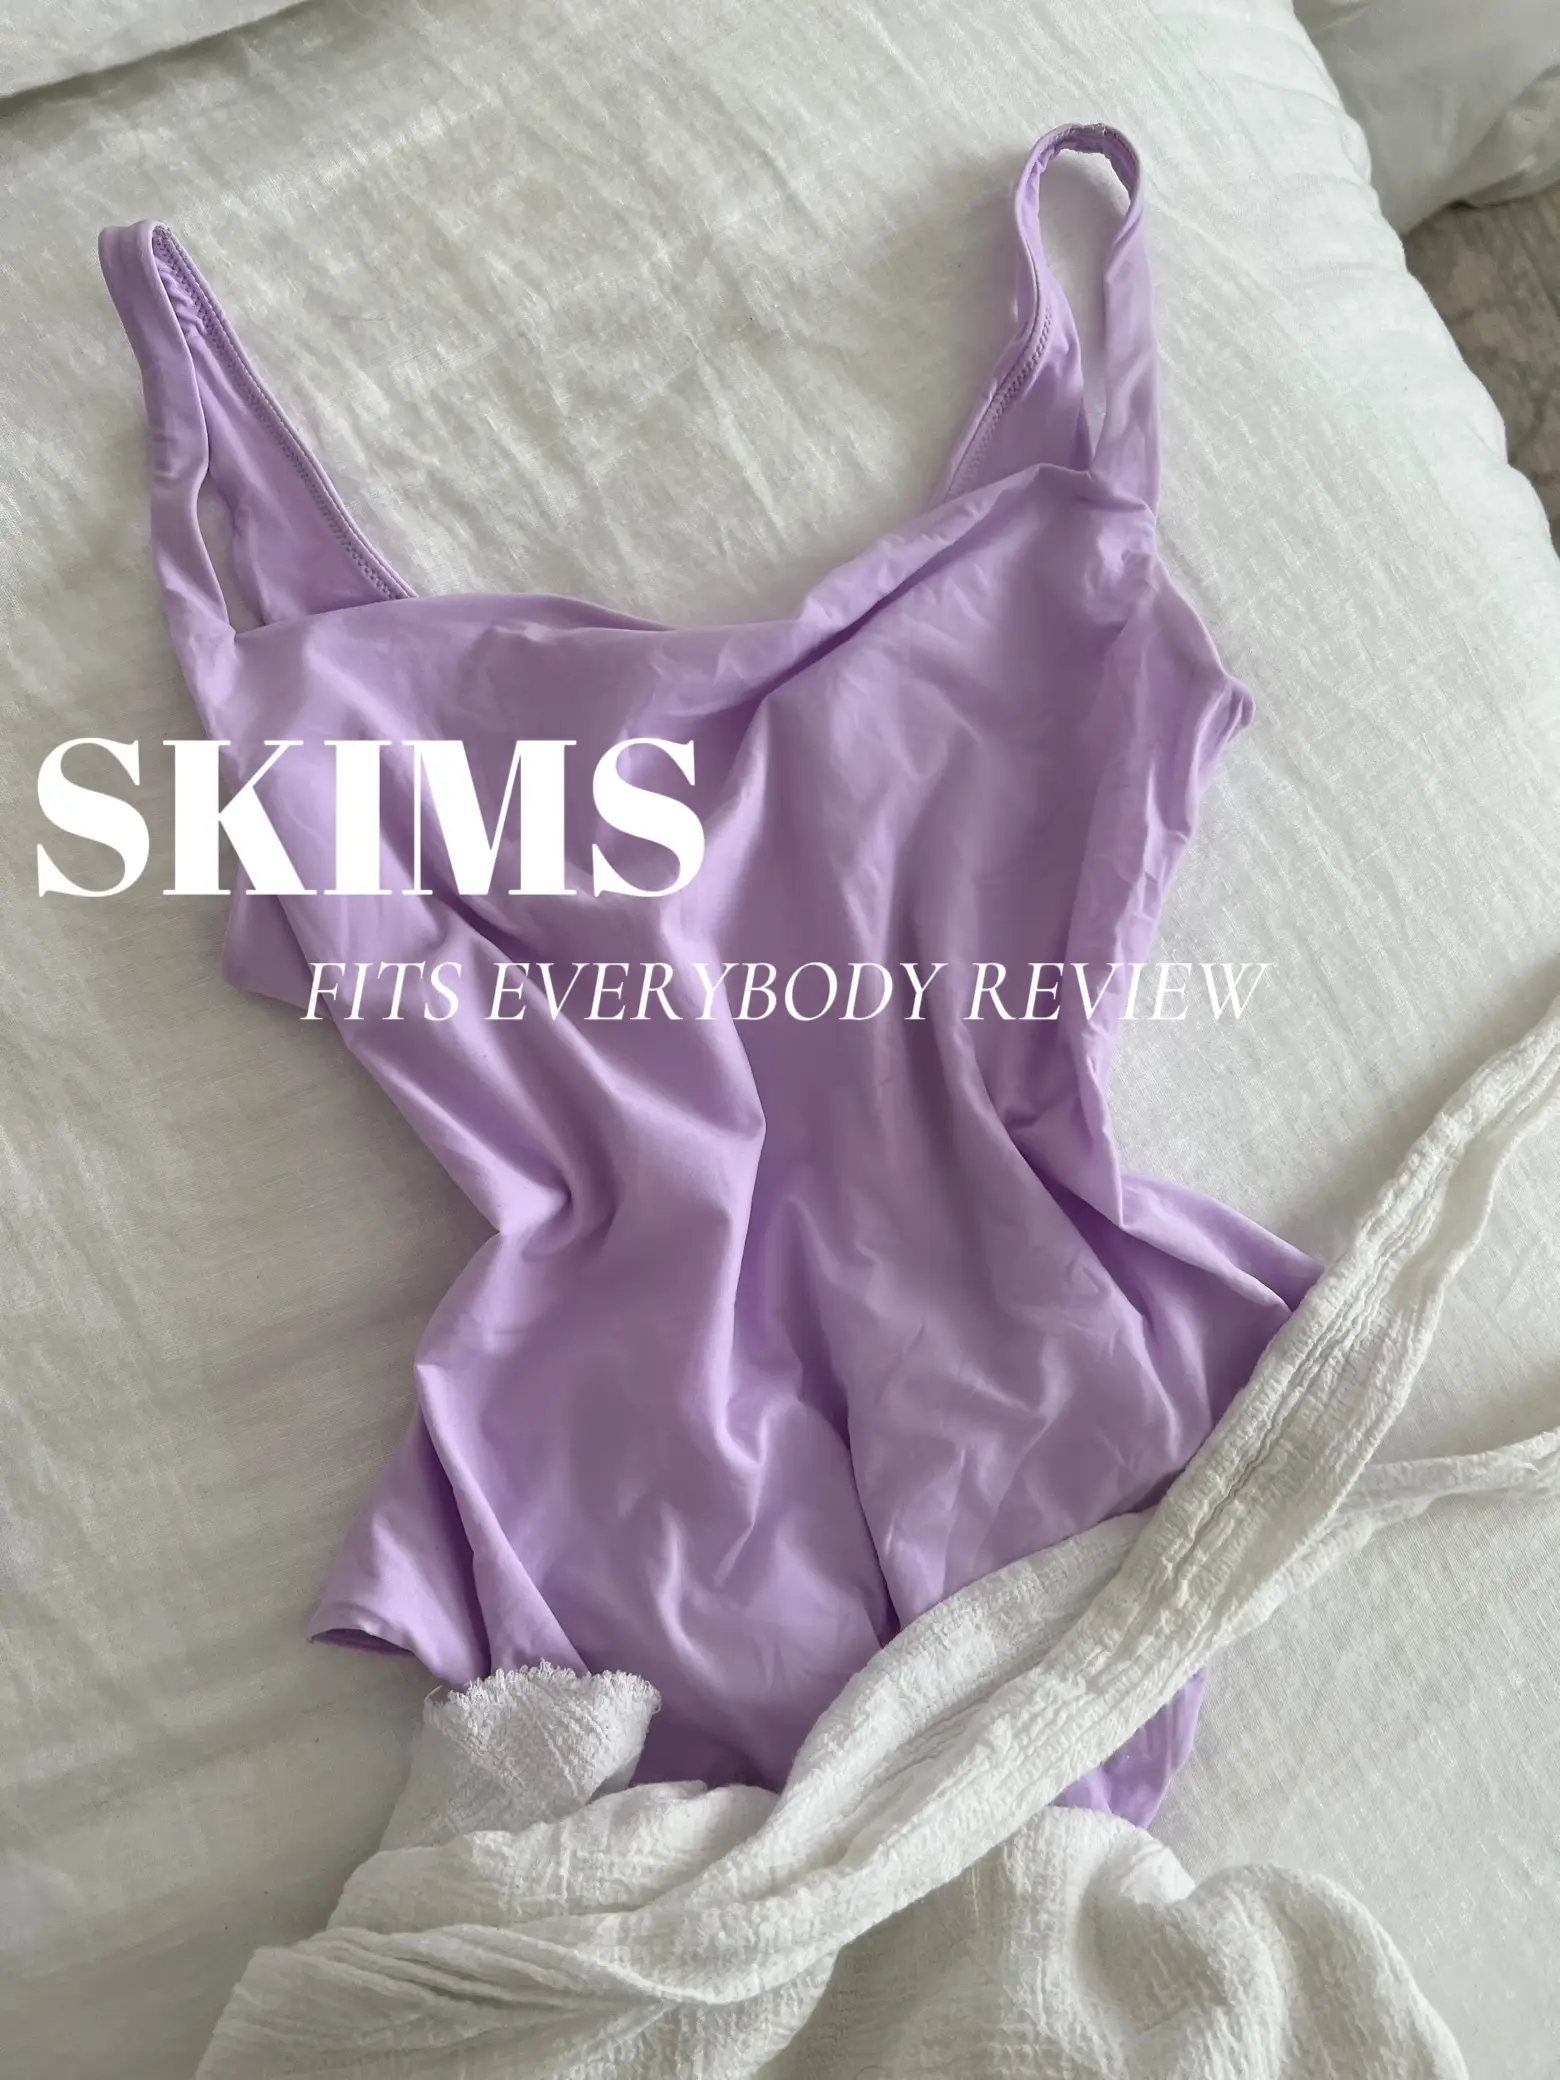 Skims release Fits Everybody range featuring new bodysuits